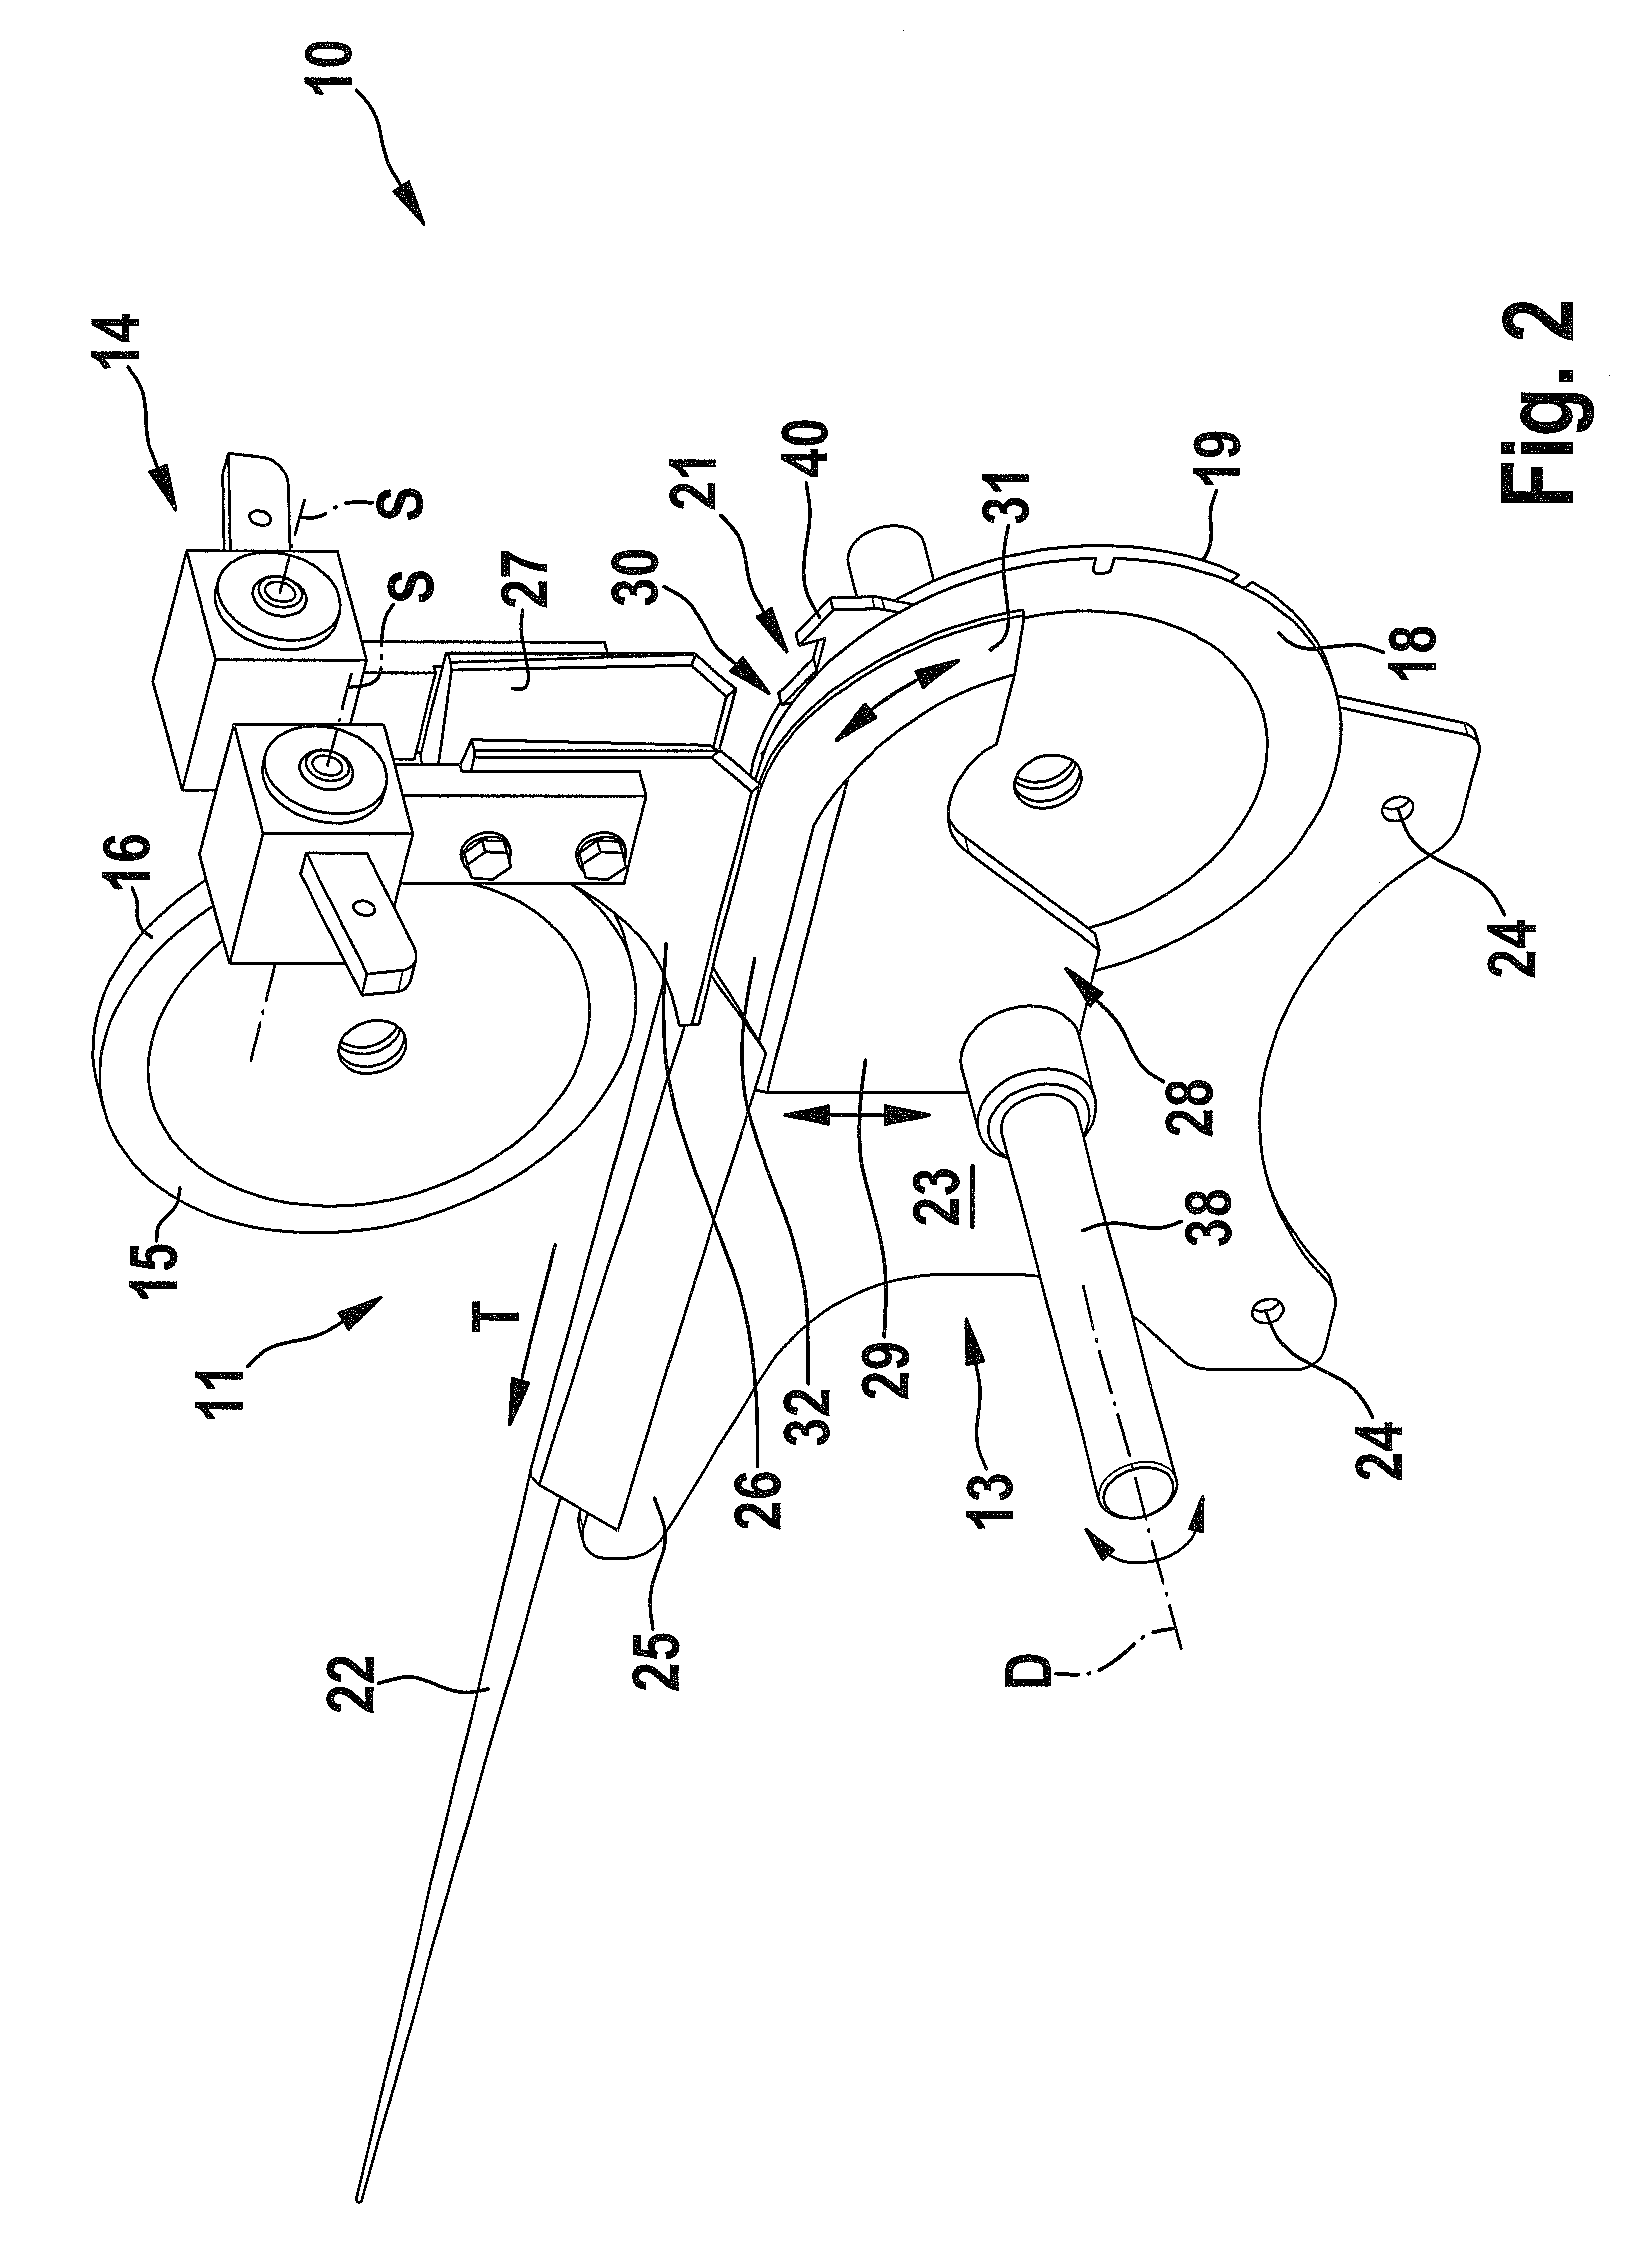 Apparatus and method for filleting beheaded and gutted fish